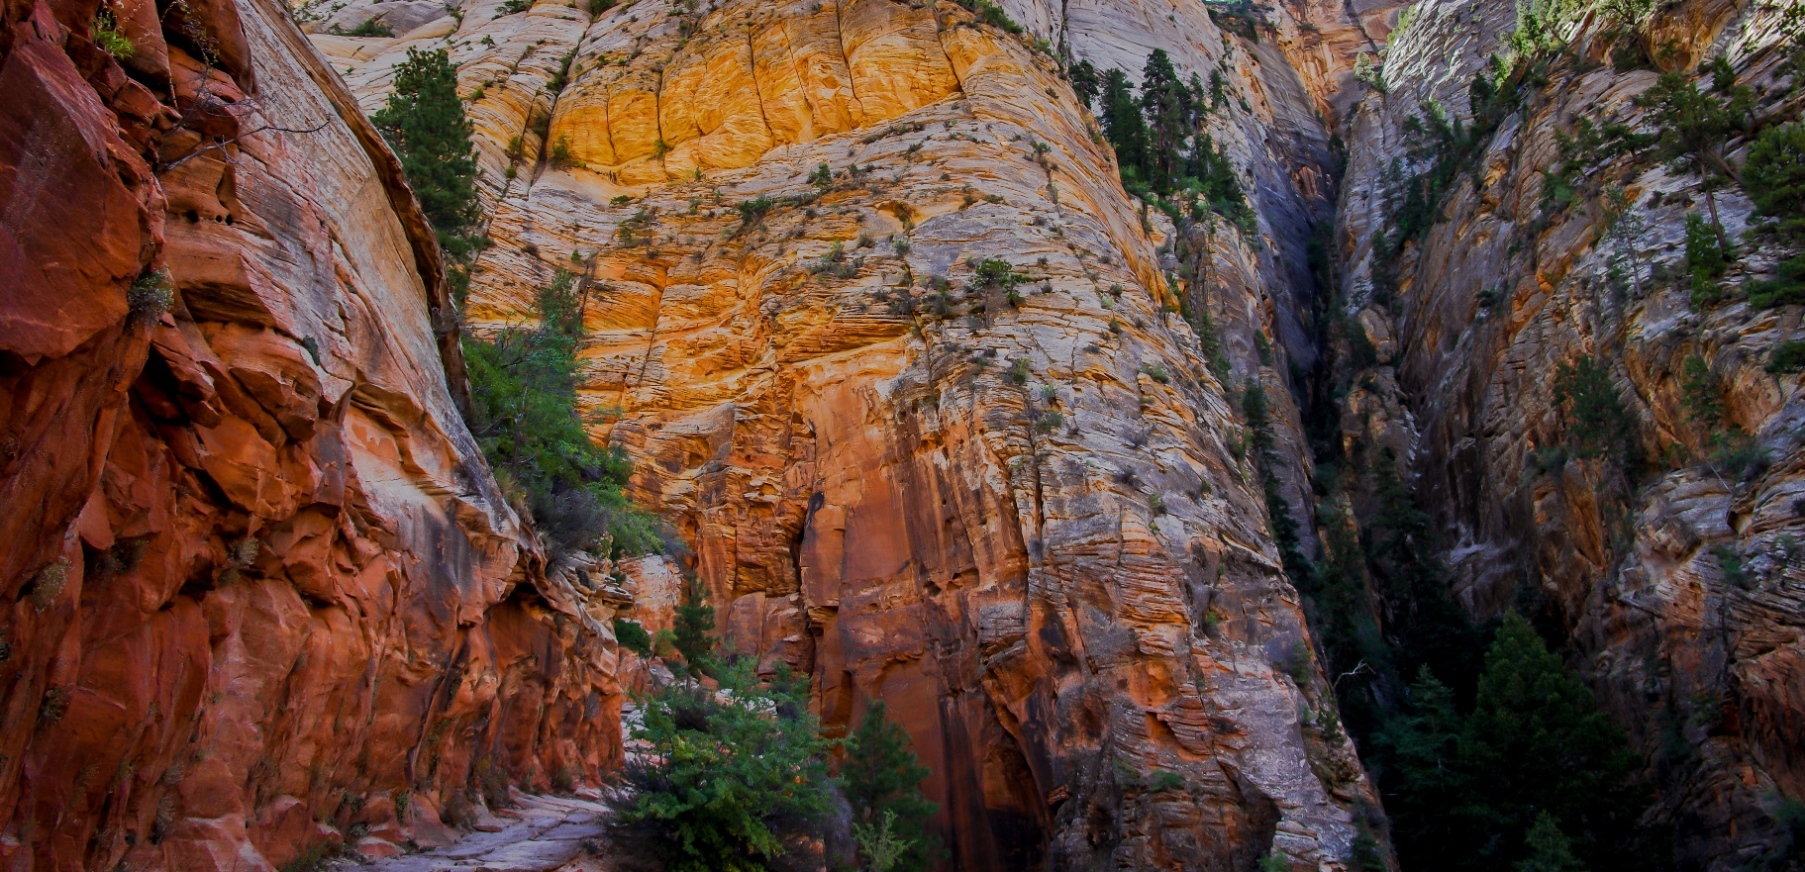 About Midpoint Of Trail To Observation Point In Zion National Park, UT